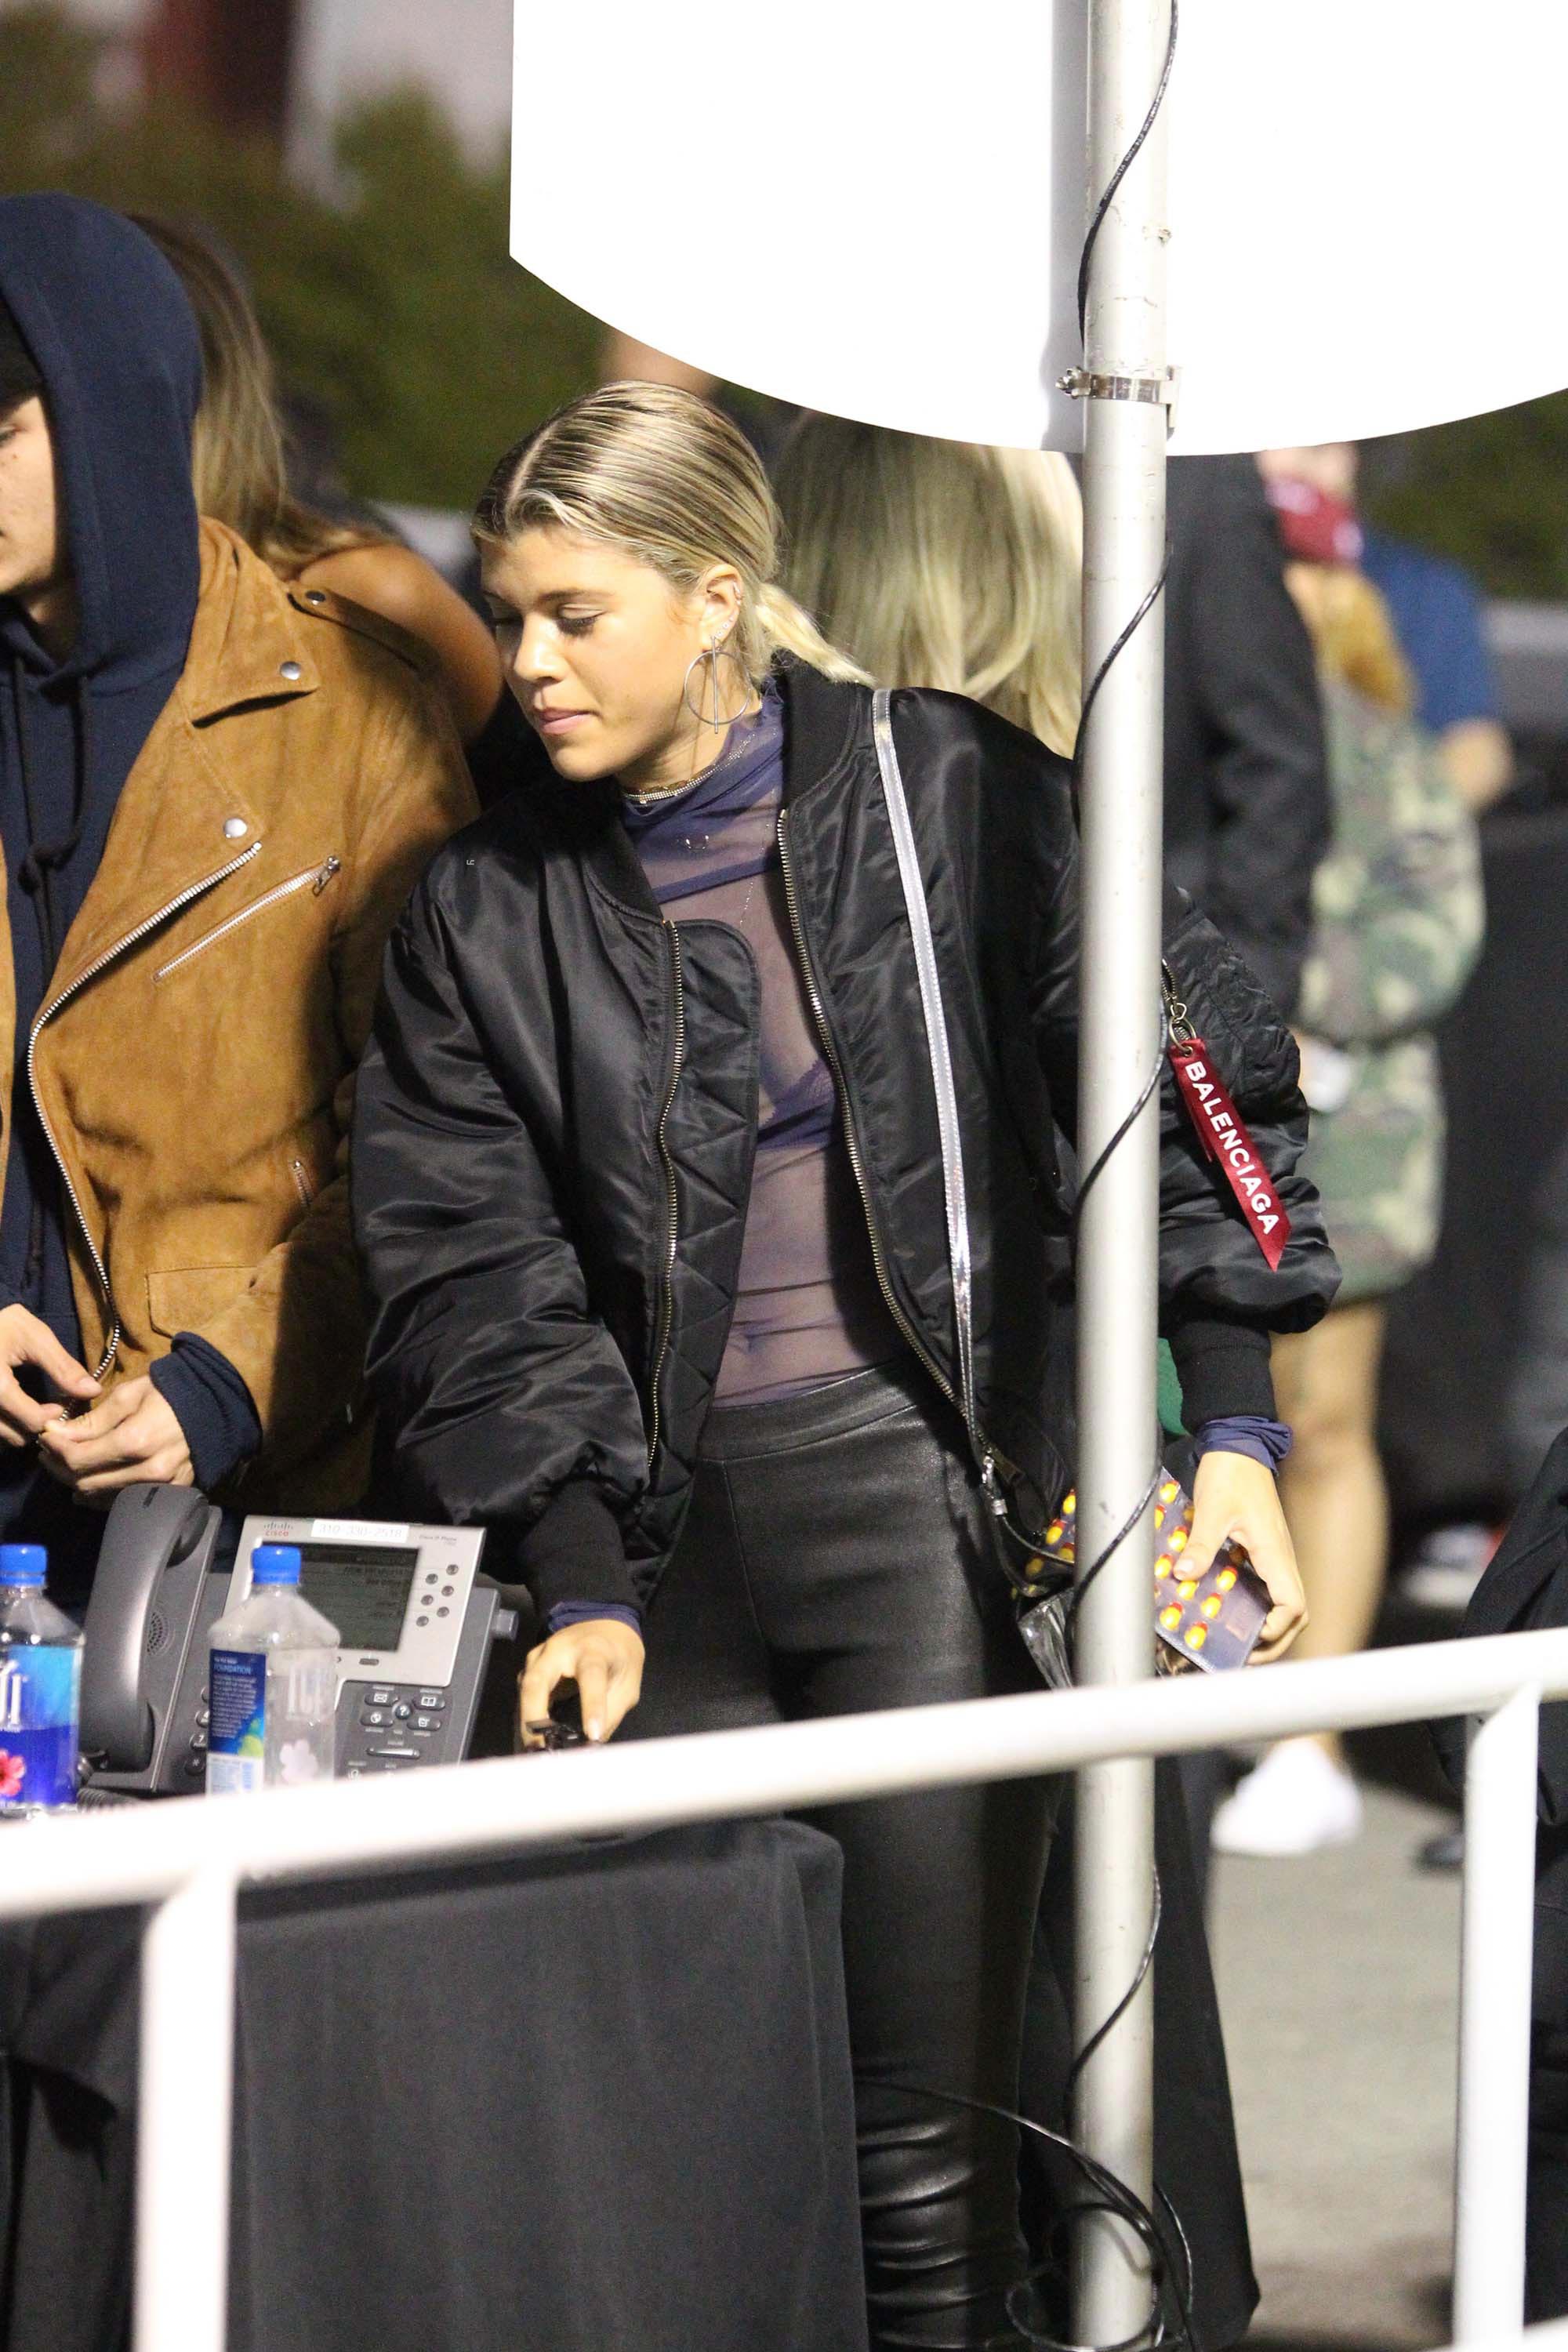 Sofia Richie attends Kanye West concert